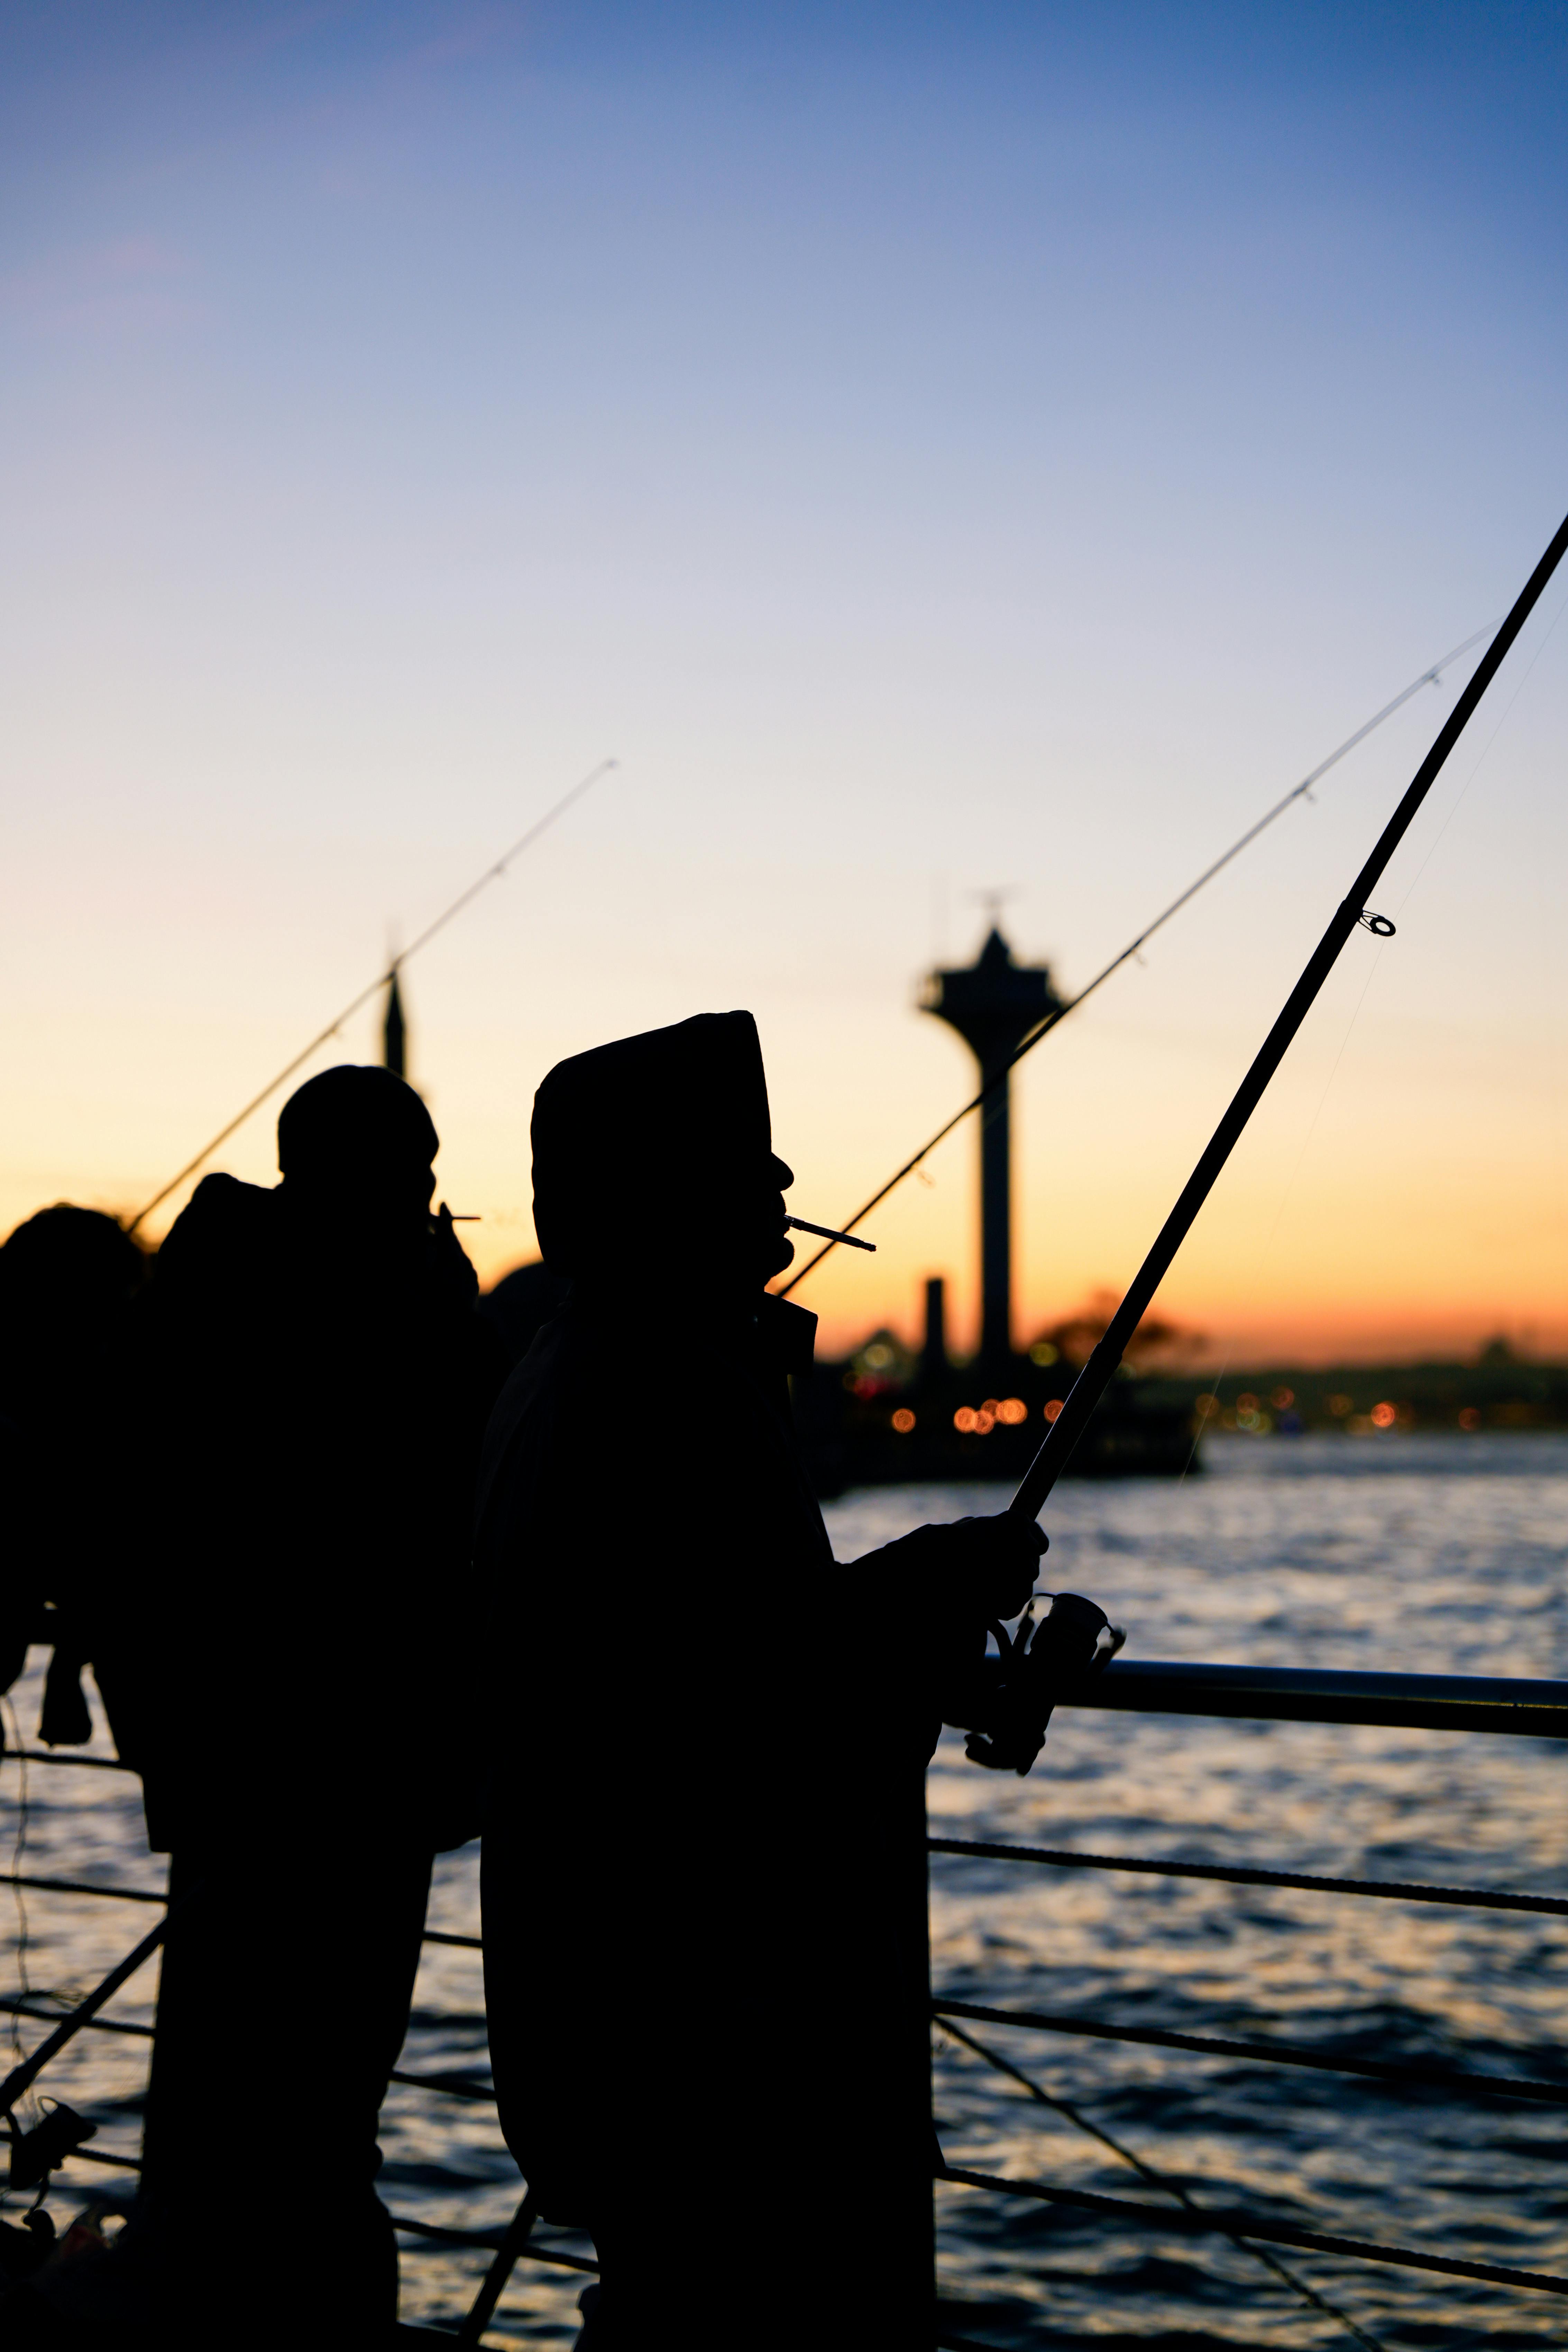 Men Fishing in the Sea from the Pier at Sunset · Free Stock Photo